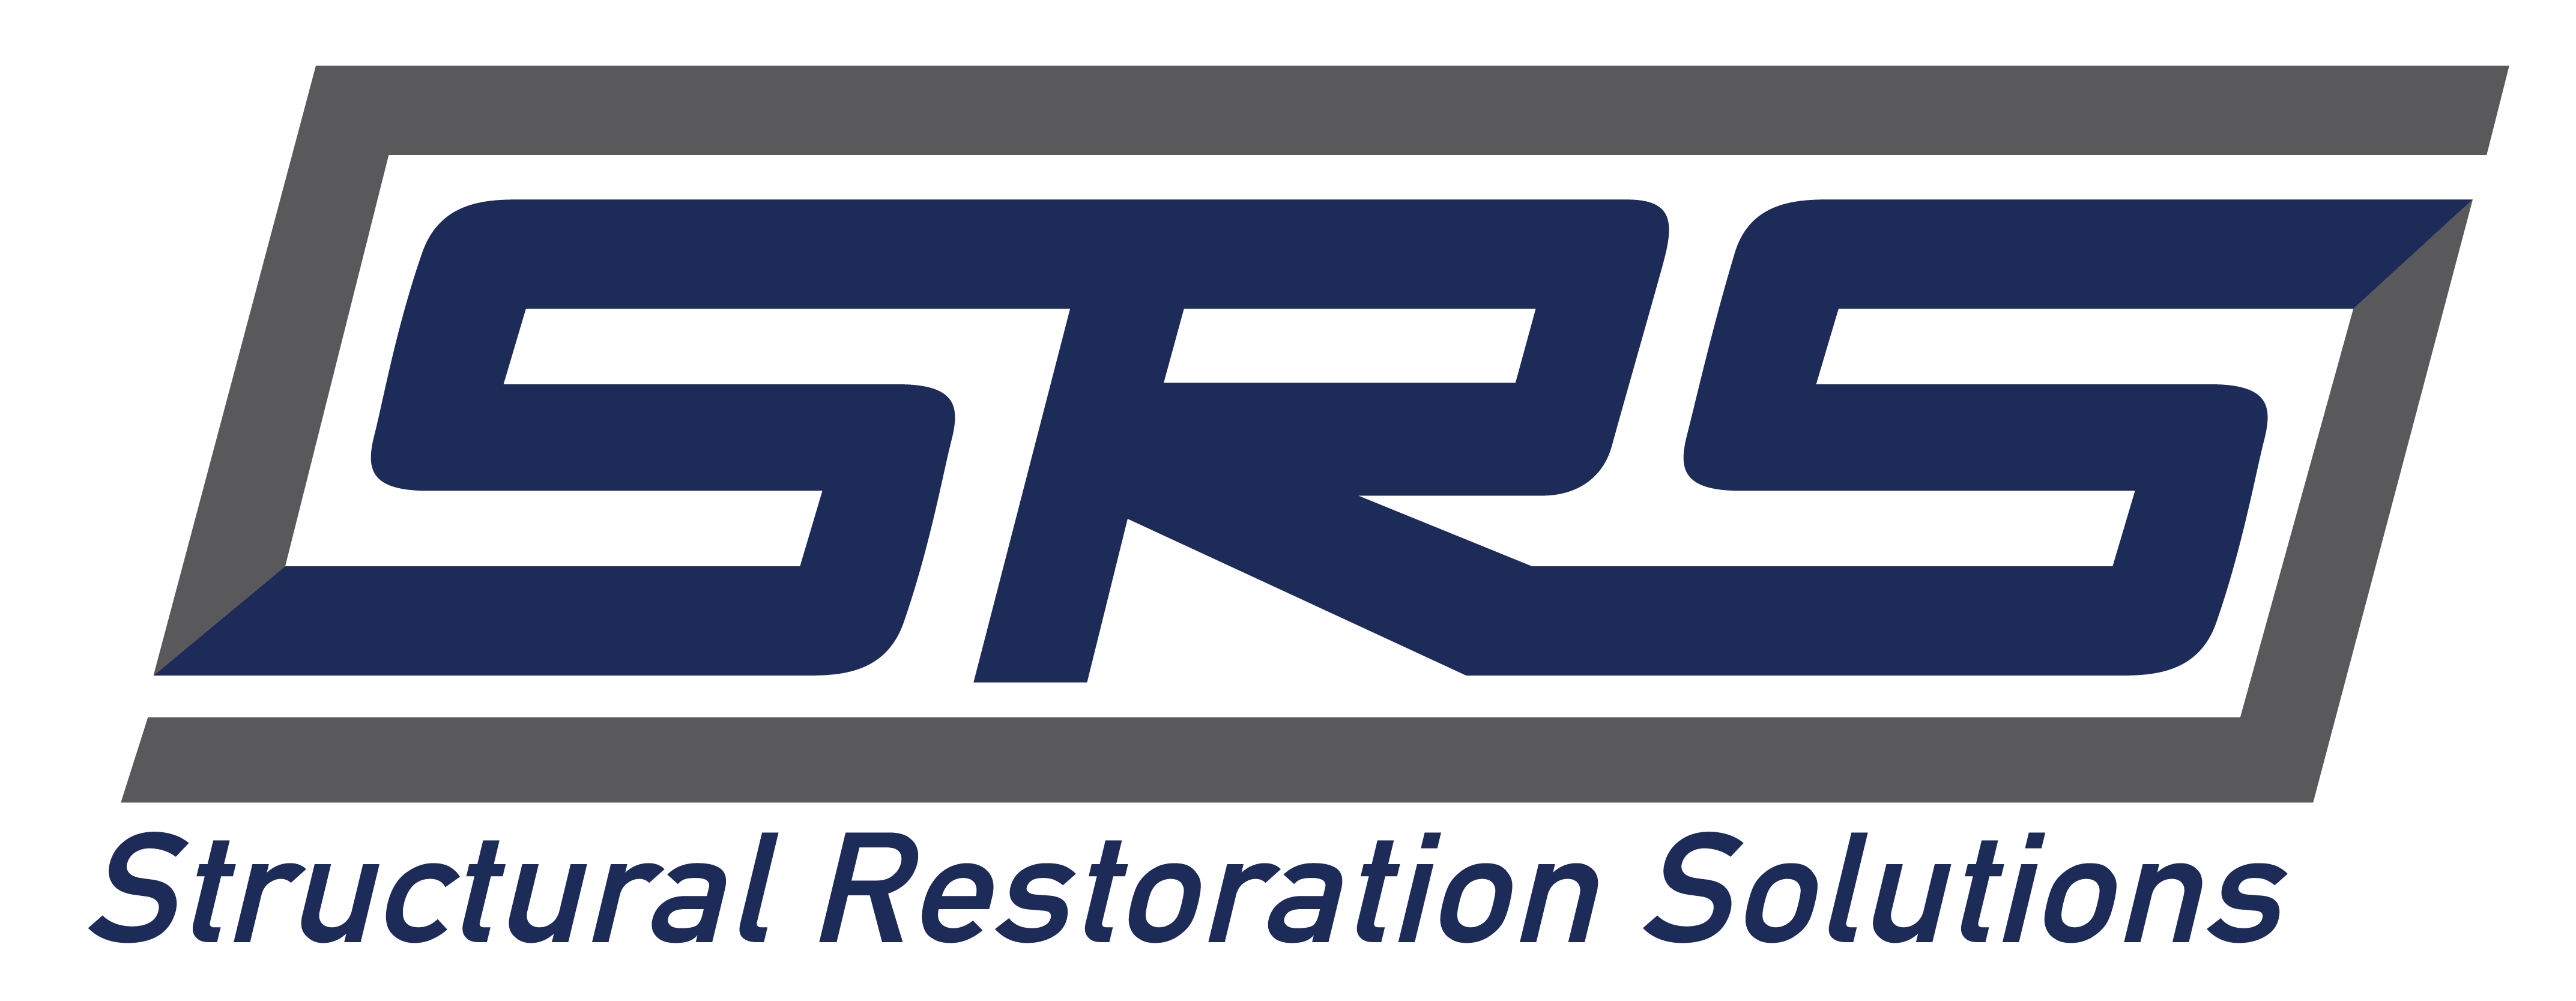 Structural Restoration Solutions